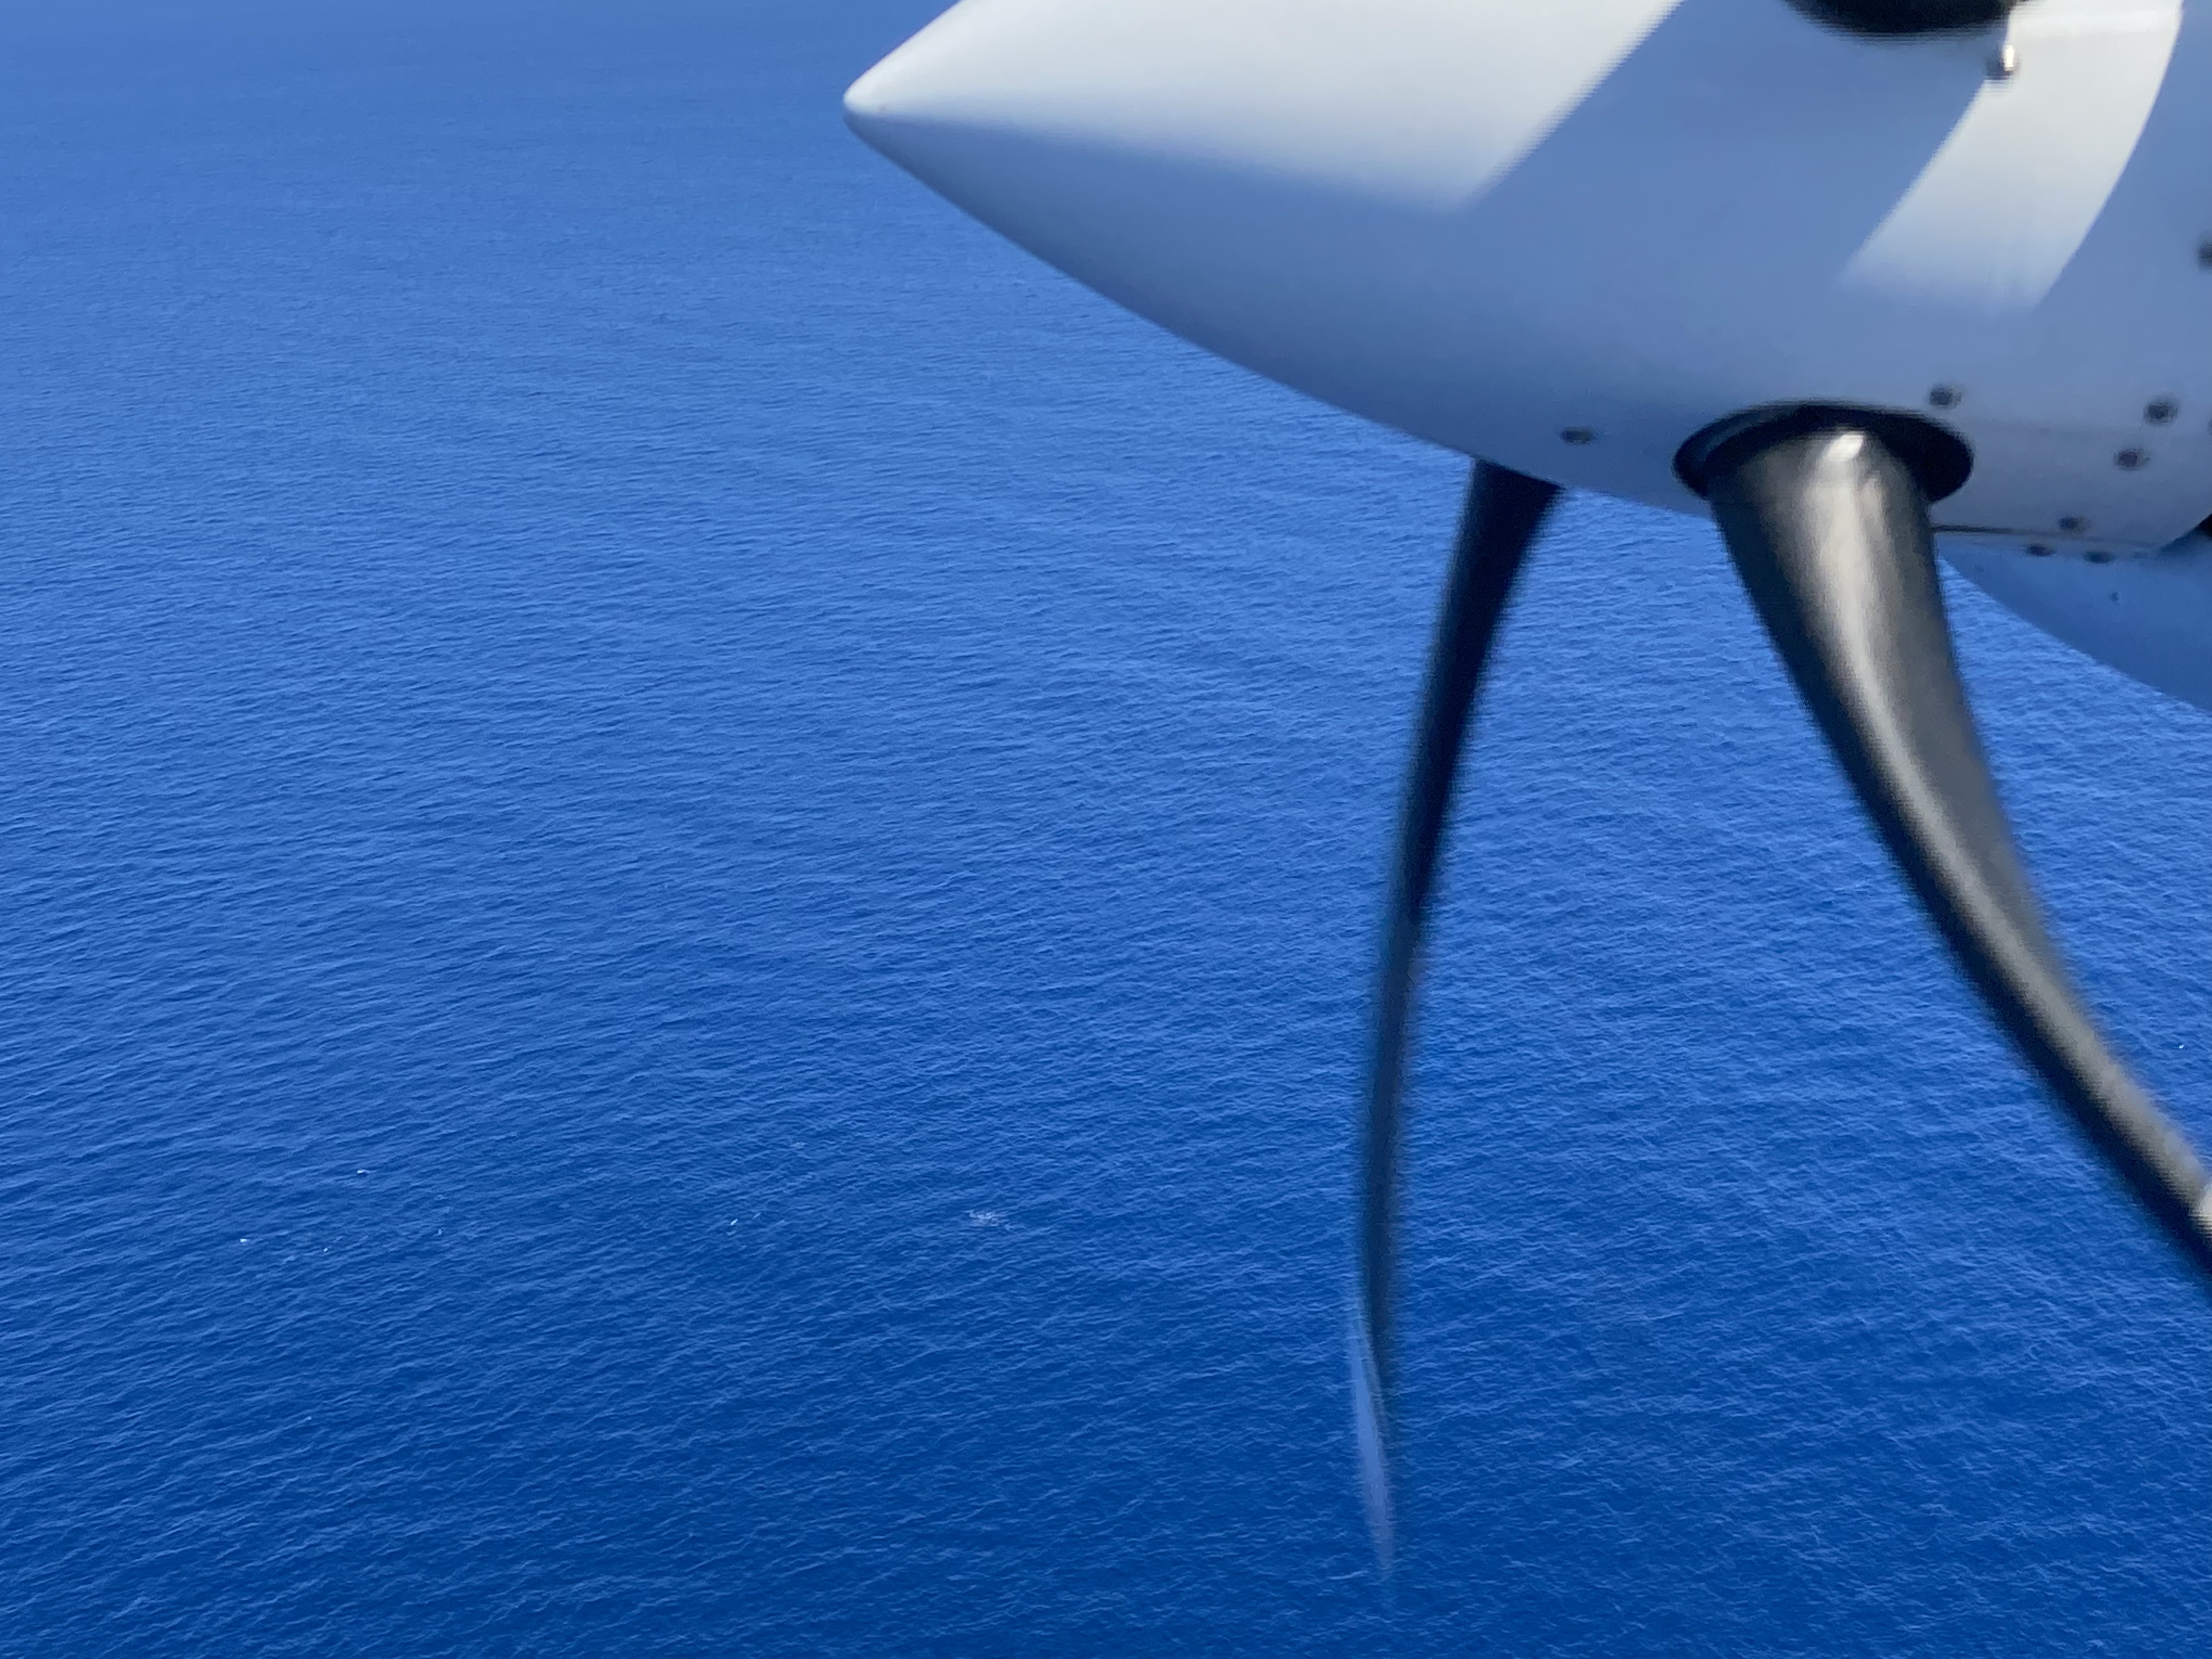 Pod of dolphins seen from aircraft with spinning propeller at right edge of photo